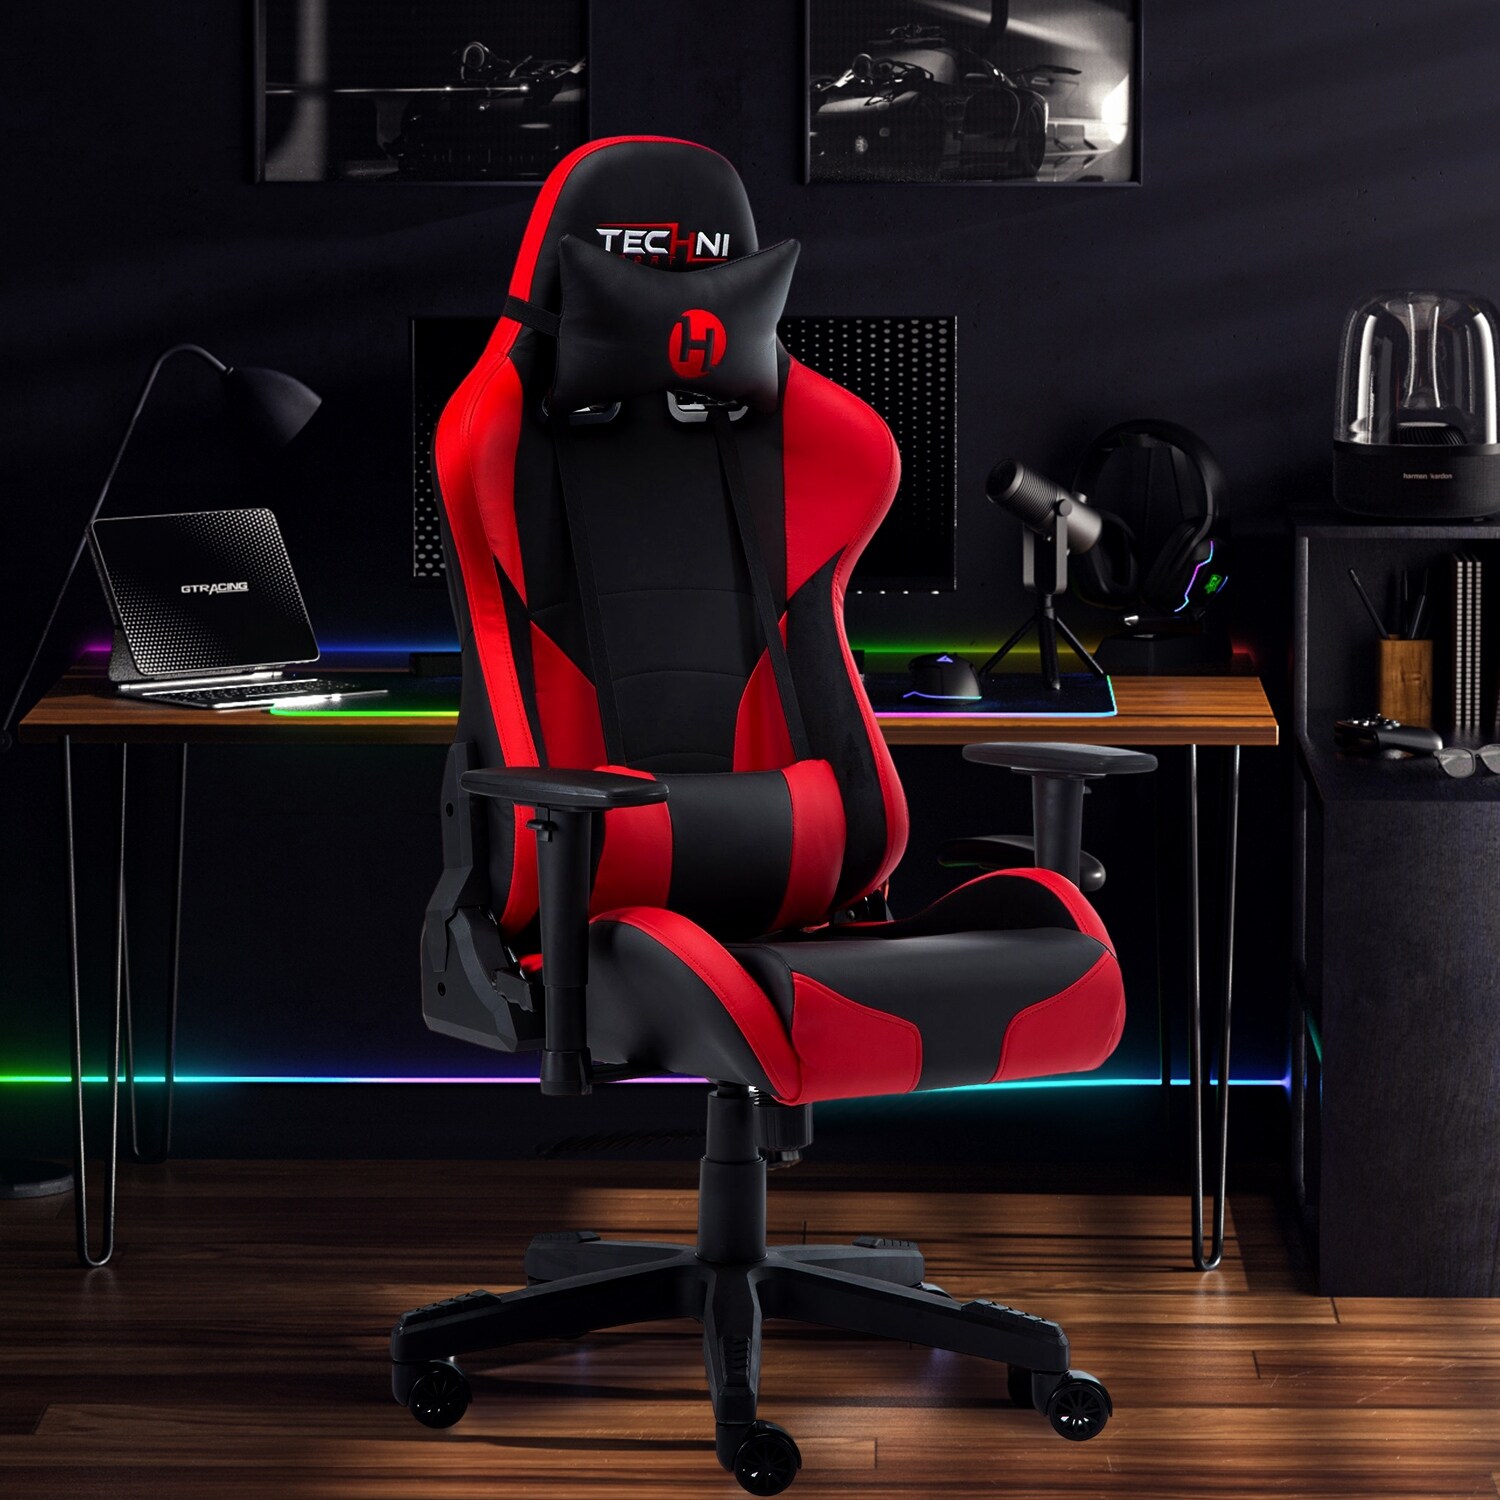 https://ak1.ostkcdn.com/images/products/is/images/direct/2f5a0d5fb0371cc61b4c76ff505f0fad6db63564/Topcraft-Office-PC-Gaming-Chair%2C-Red.jpg